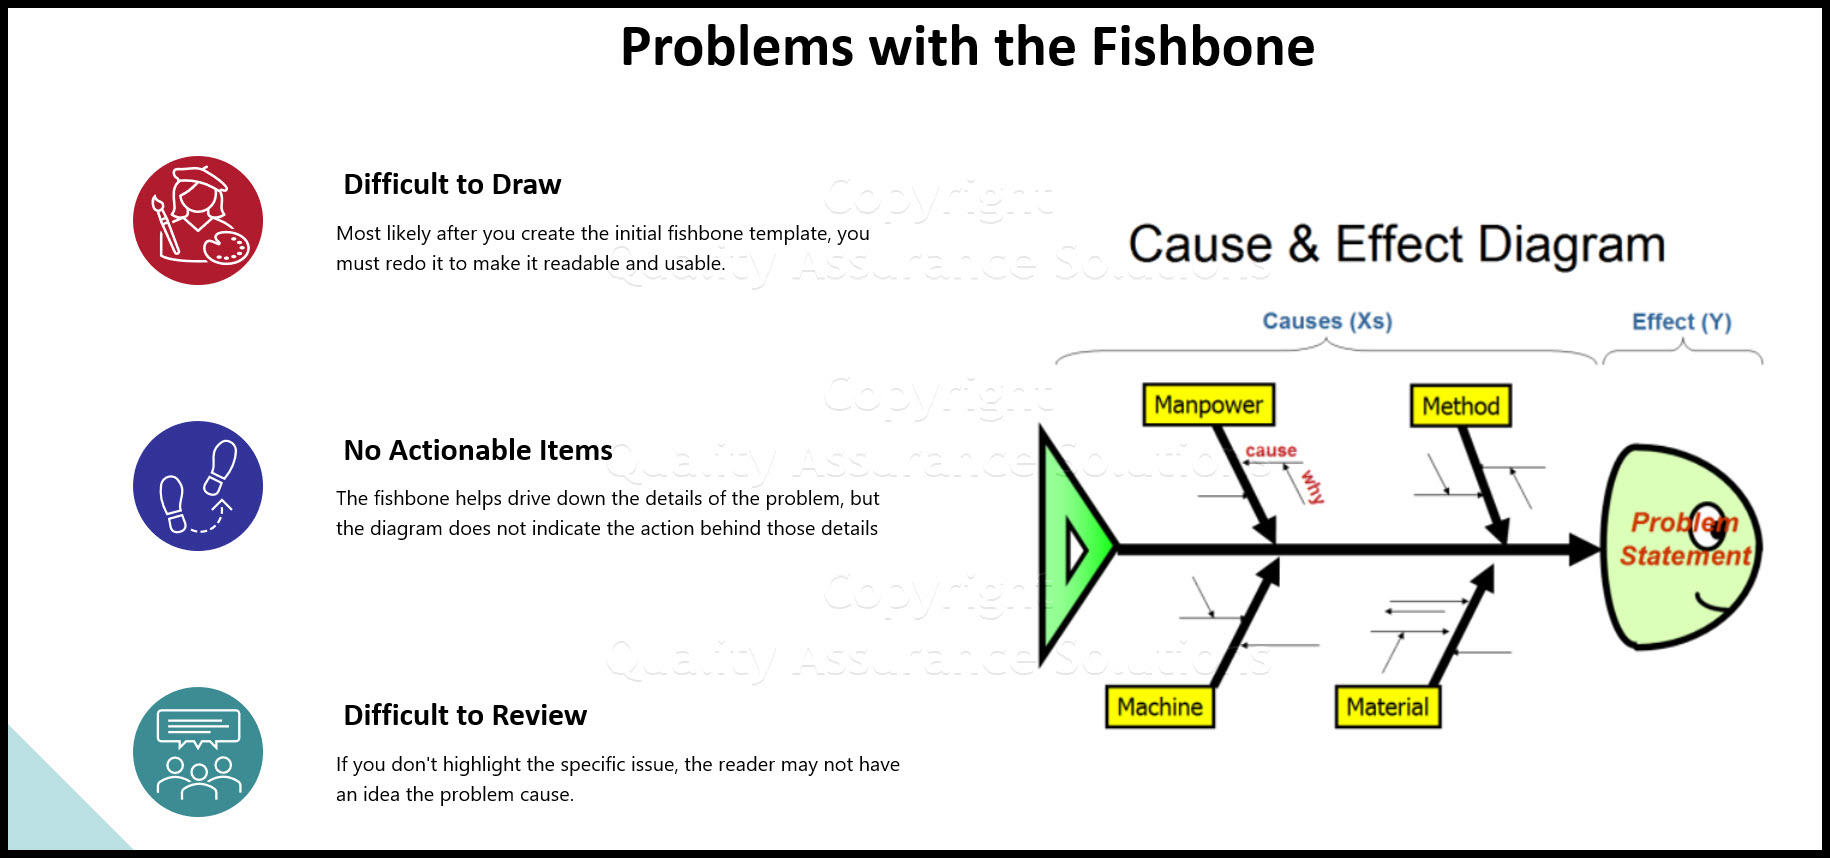 This page discusses how to improve the fishbone template, documents problems with the fishbone diagram template and fishbone charts.